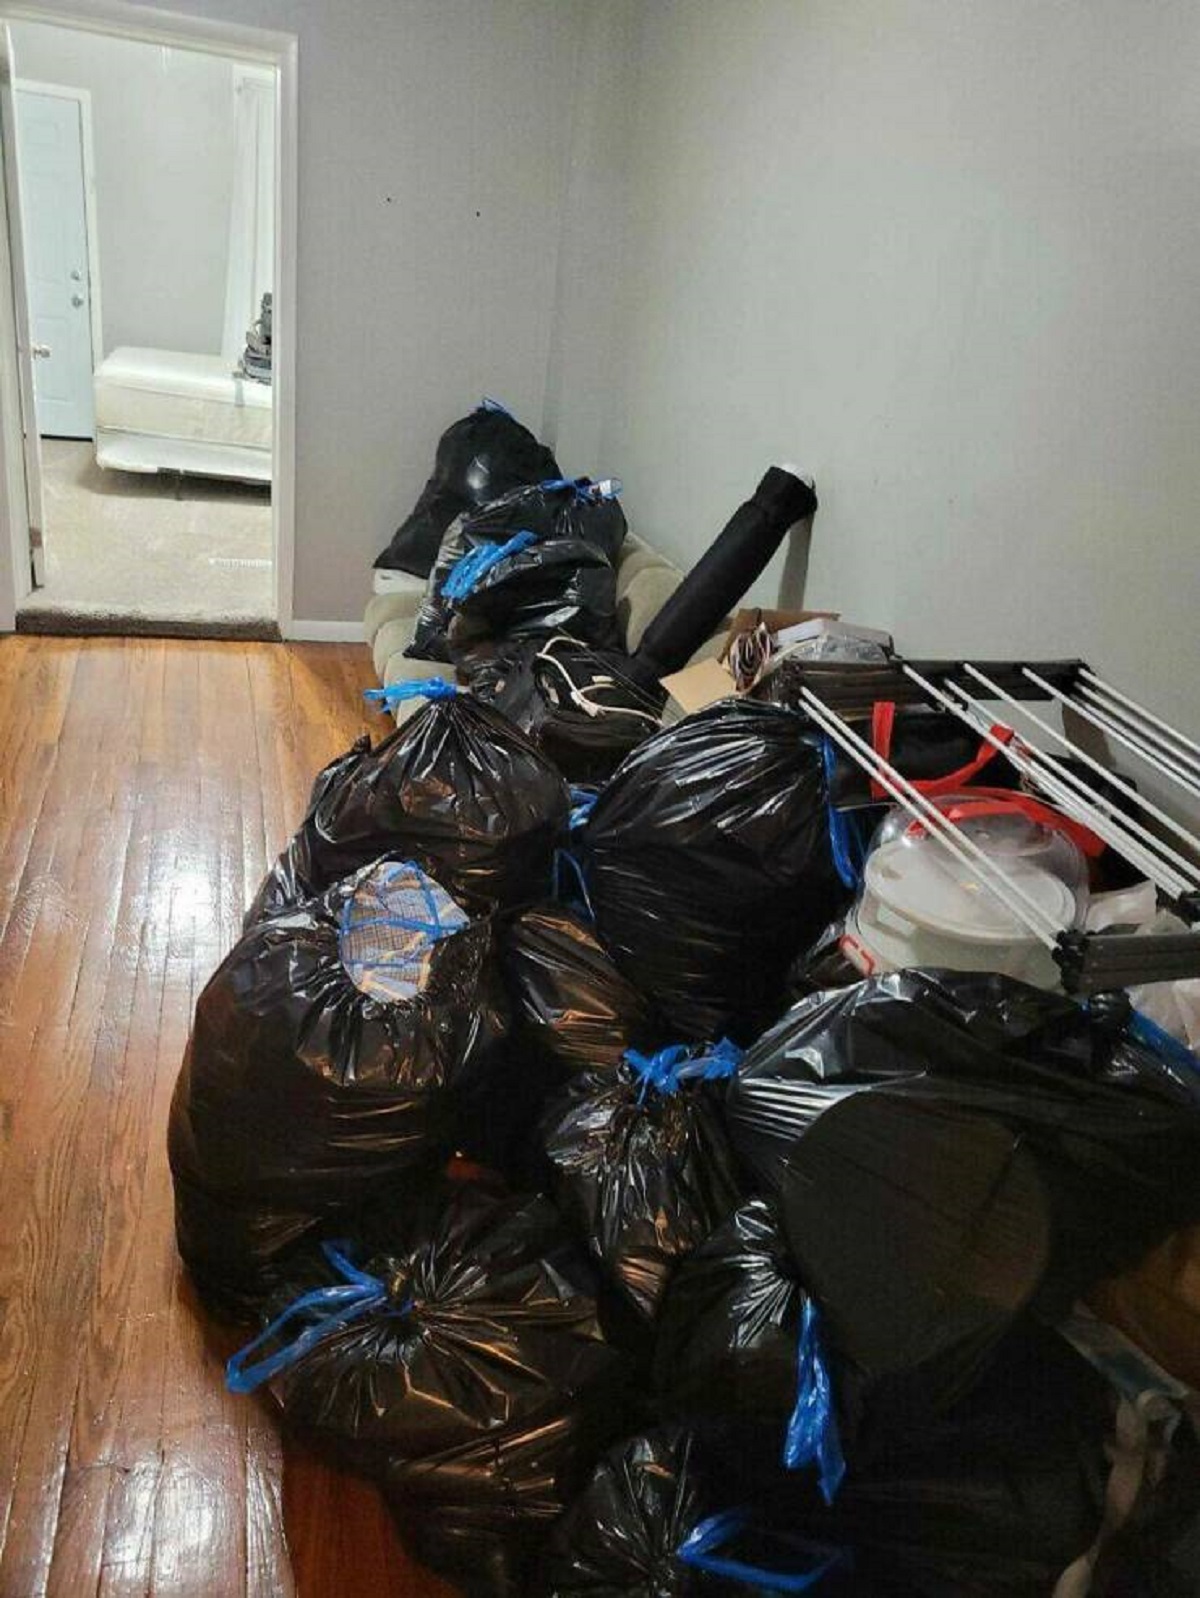 "After A Grueling Day At Work Without Food Where I Had To Wait 4 Hours For A Sample To Arrive Which Got Canceled, I Come Home At 7pm To Find All My S**t In Garbage Bags Cause The Cleaners My Landlord Sent Cleared The Wrong Apartment"